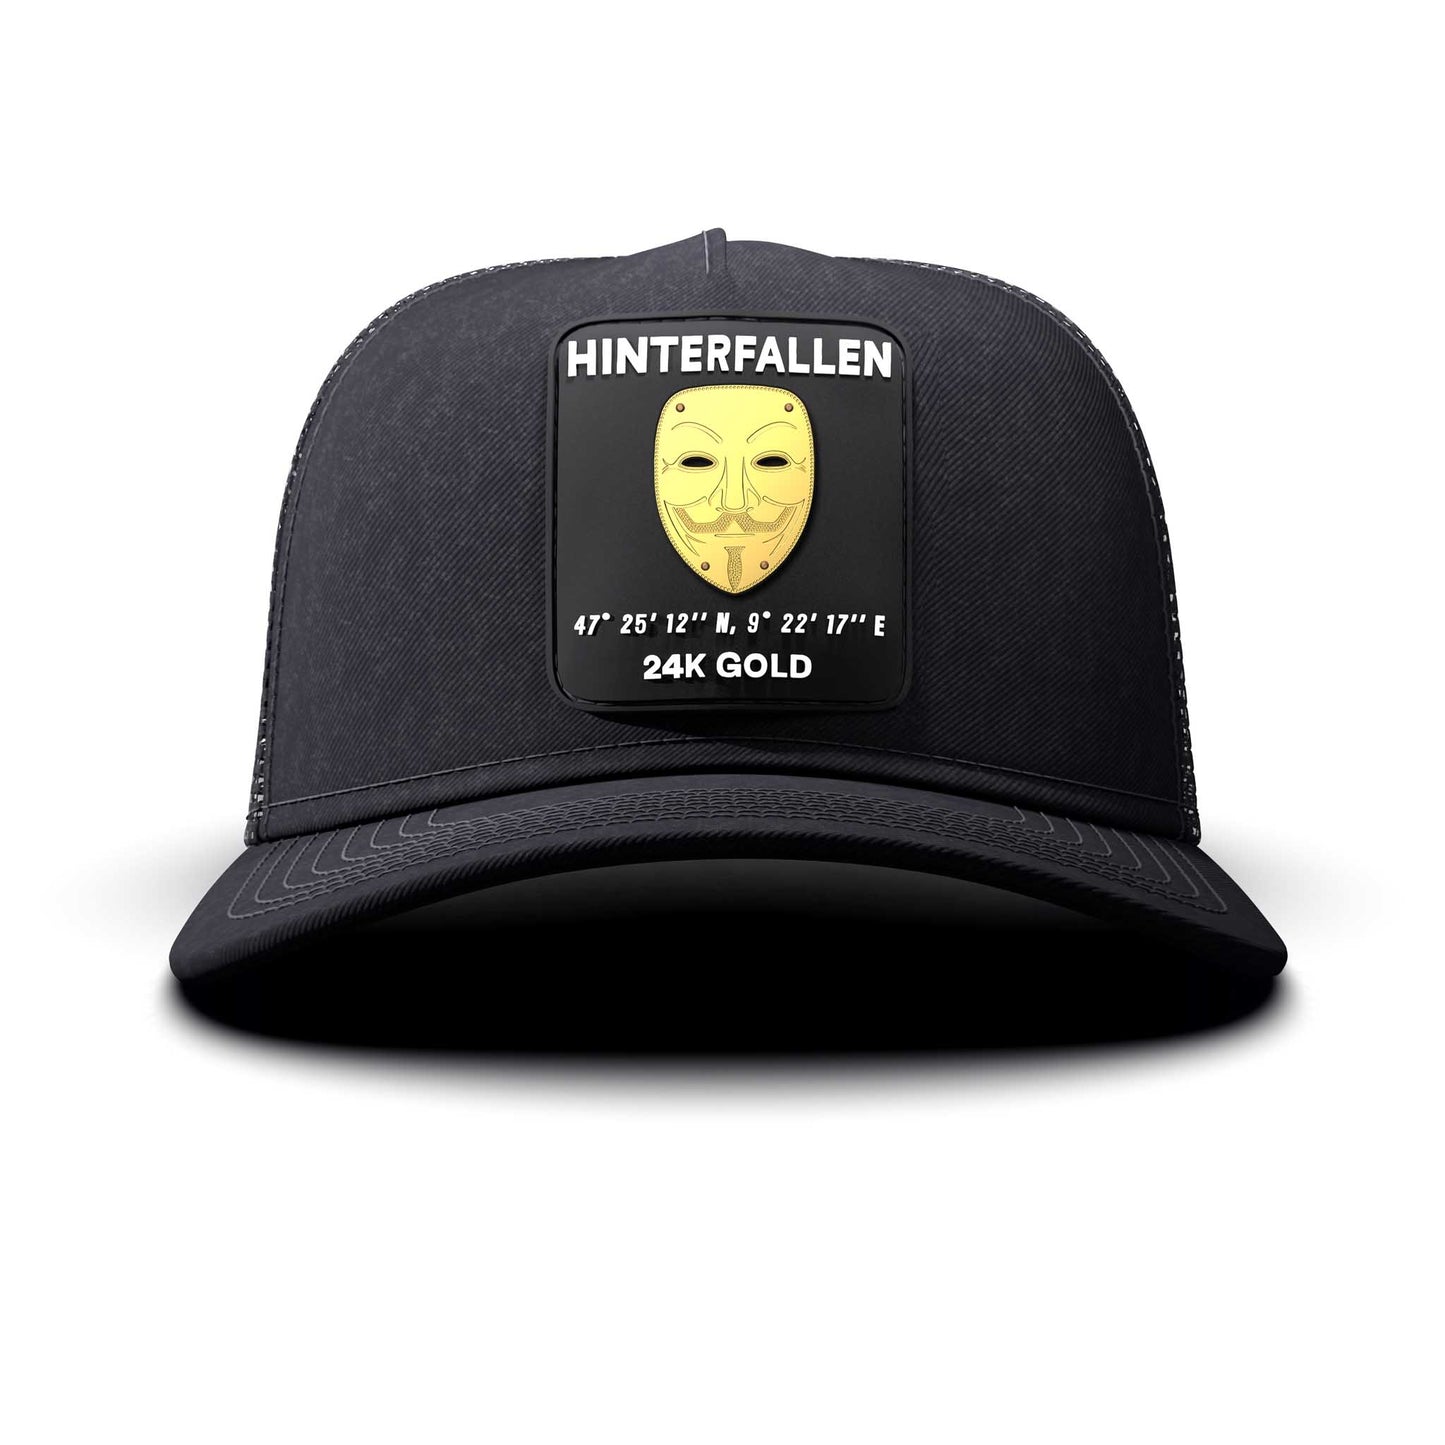 The Anonymous - Hinterfallen Patch, Trucker Cap, curved